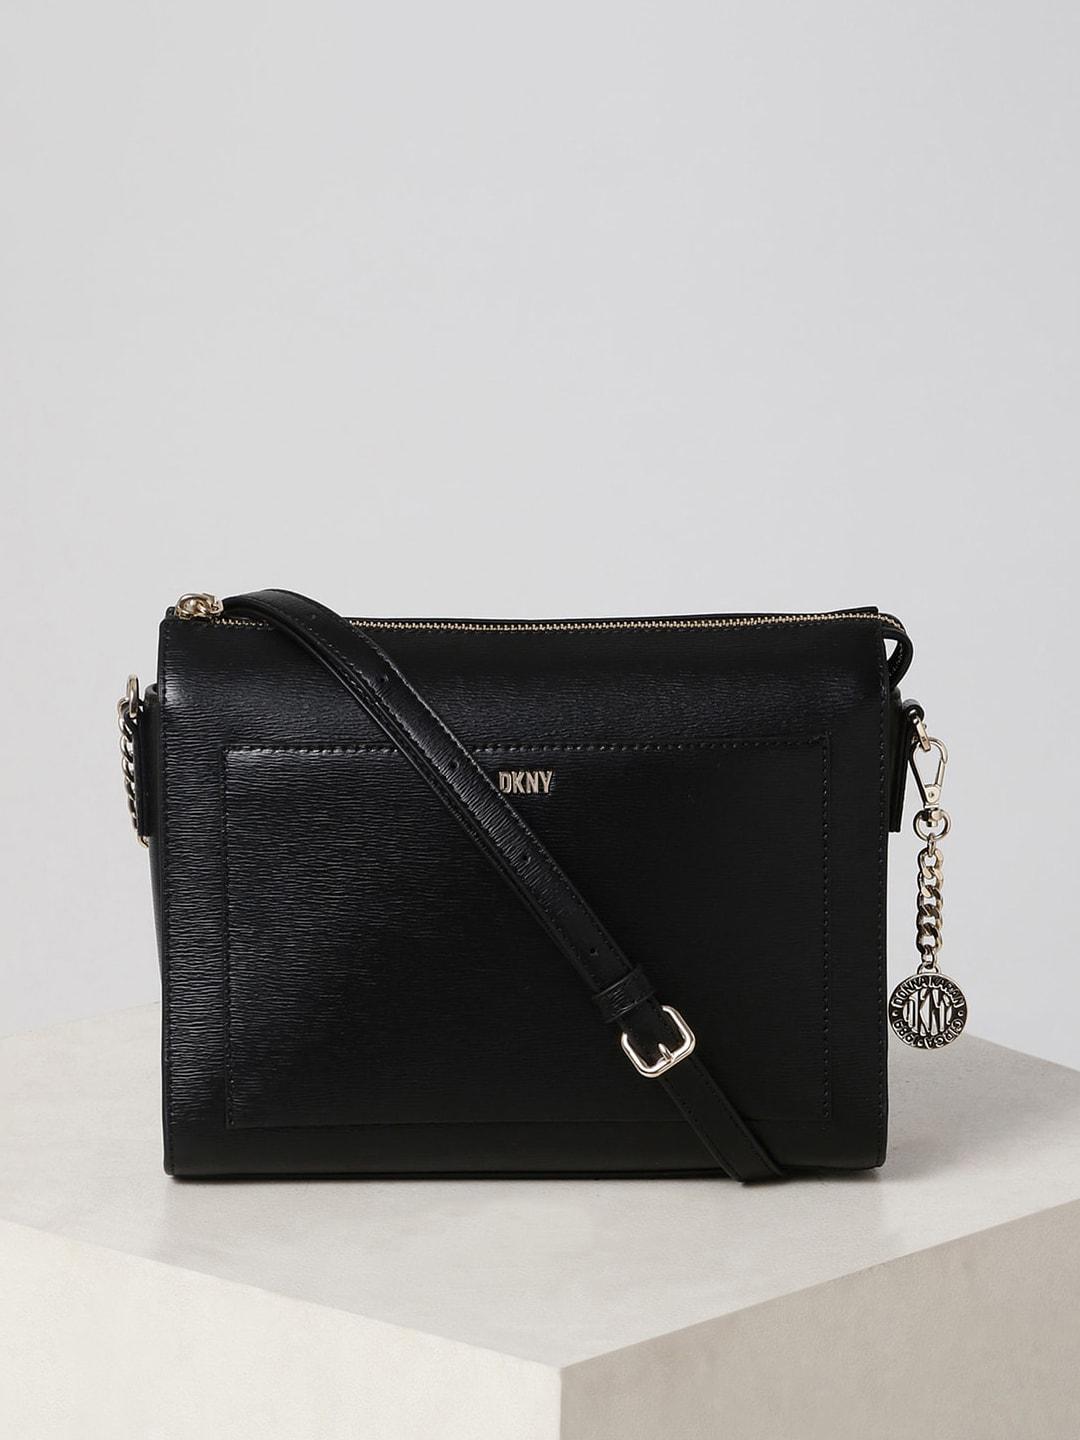 dkny textured leather sling bag